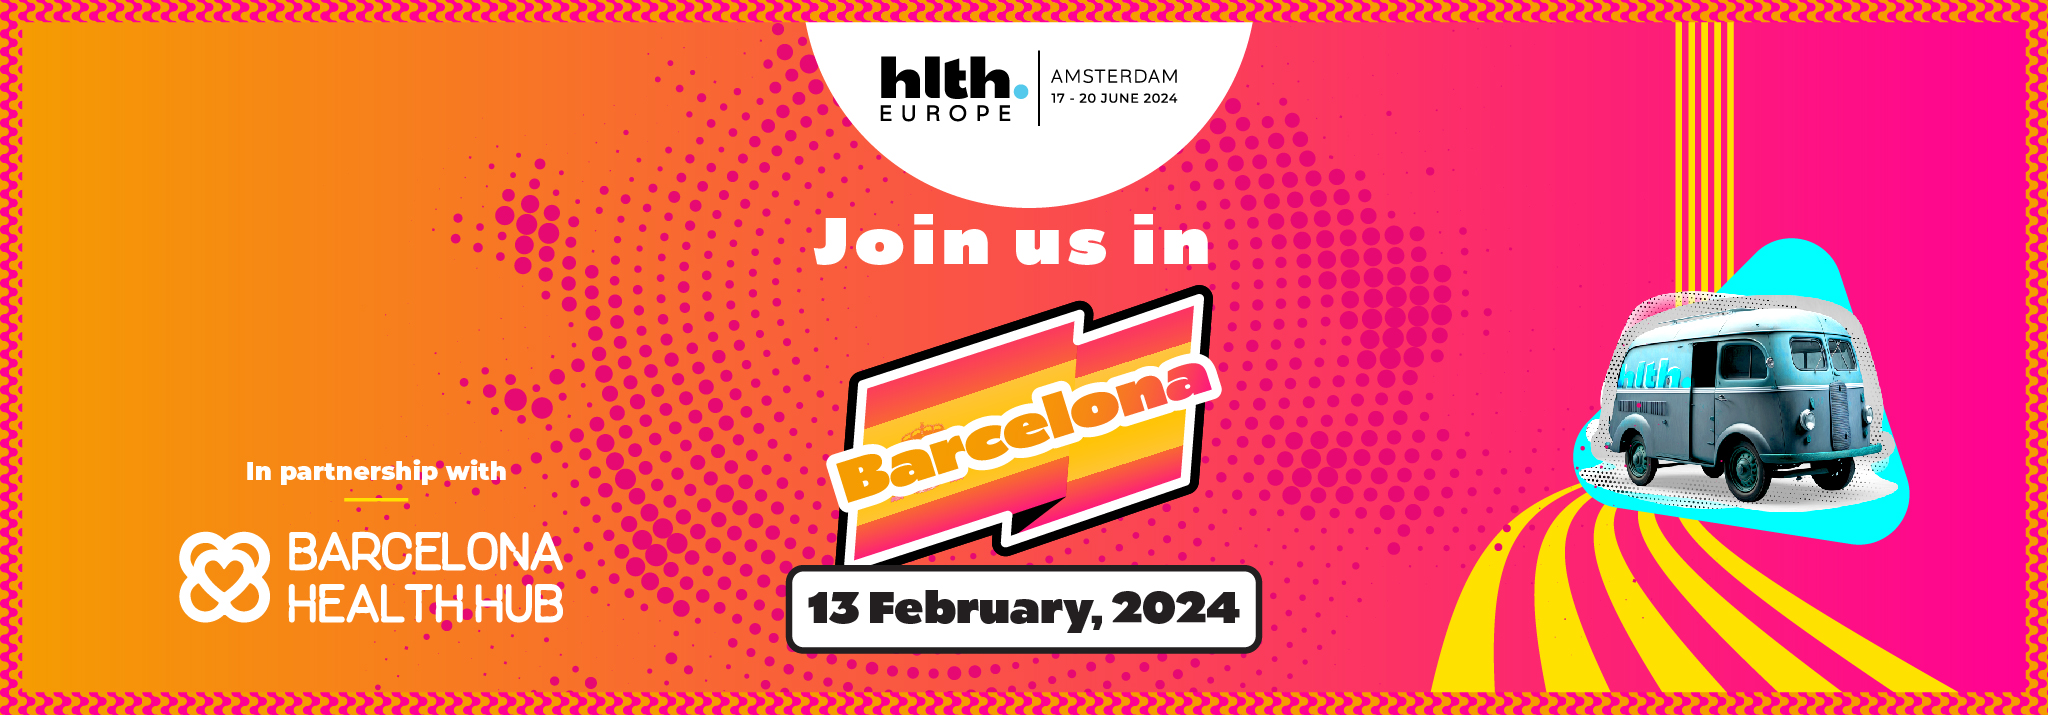 You're invited to the HLTH Roadshow Barcelona next February 13th!